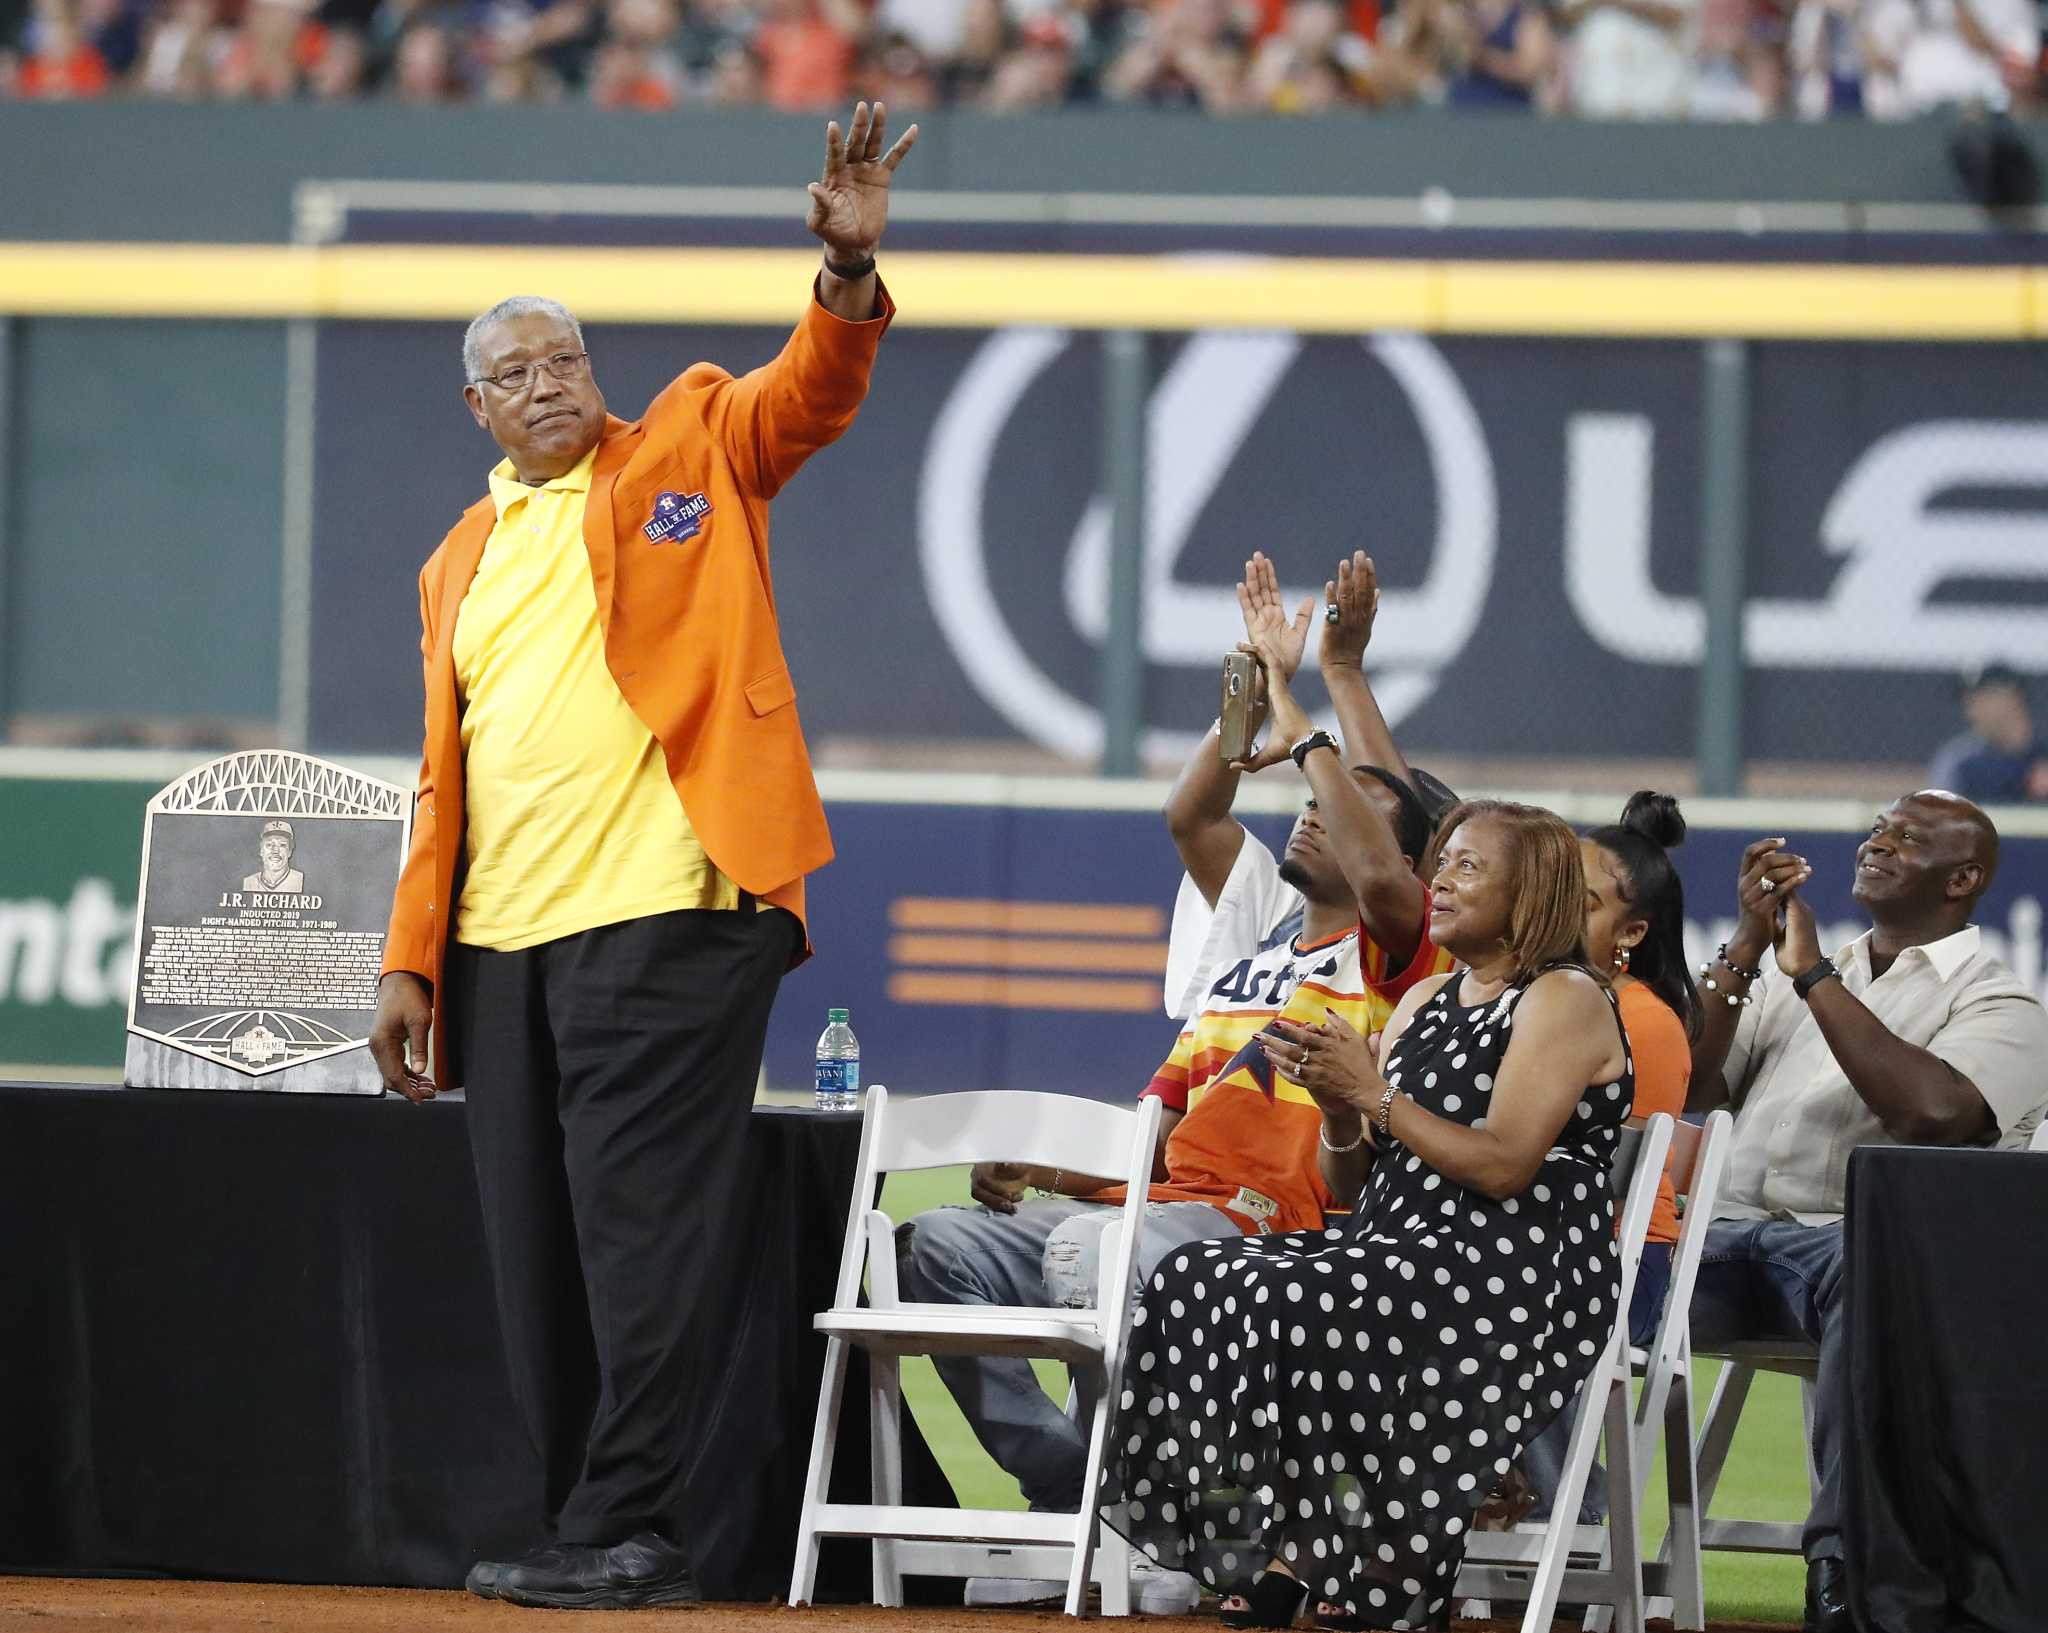 Houston Astros: What might have been for J.R. Richard